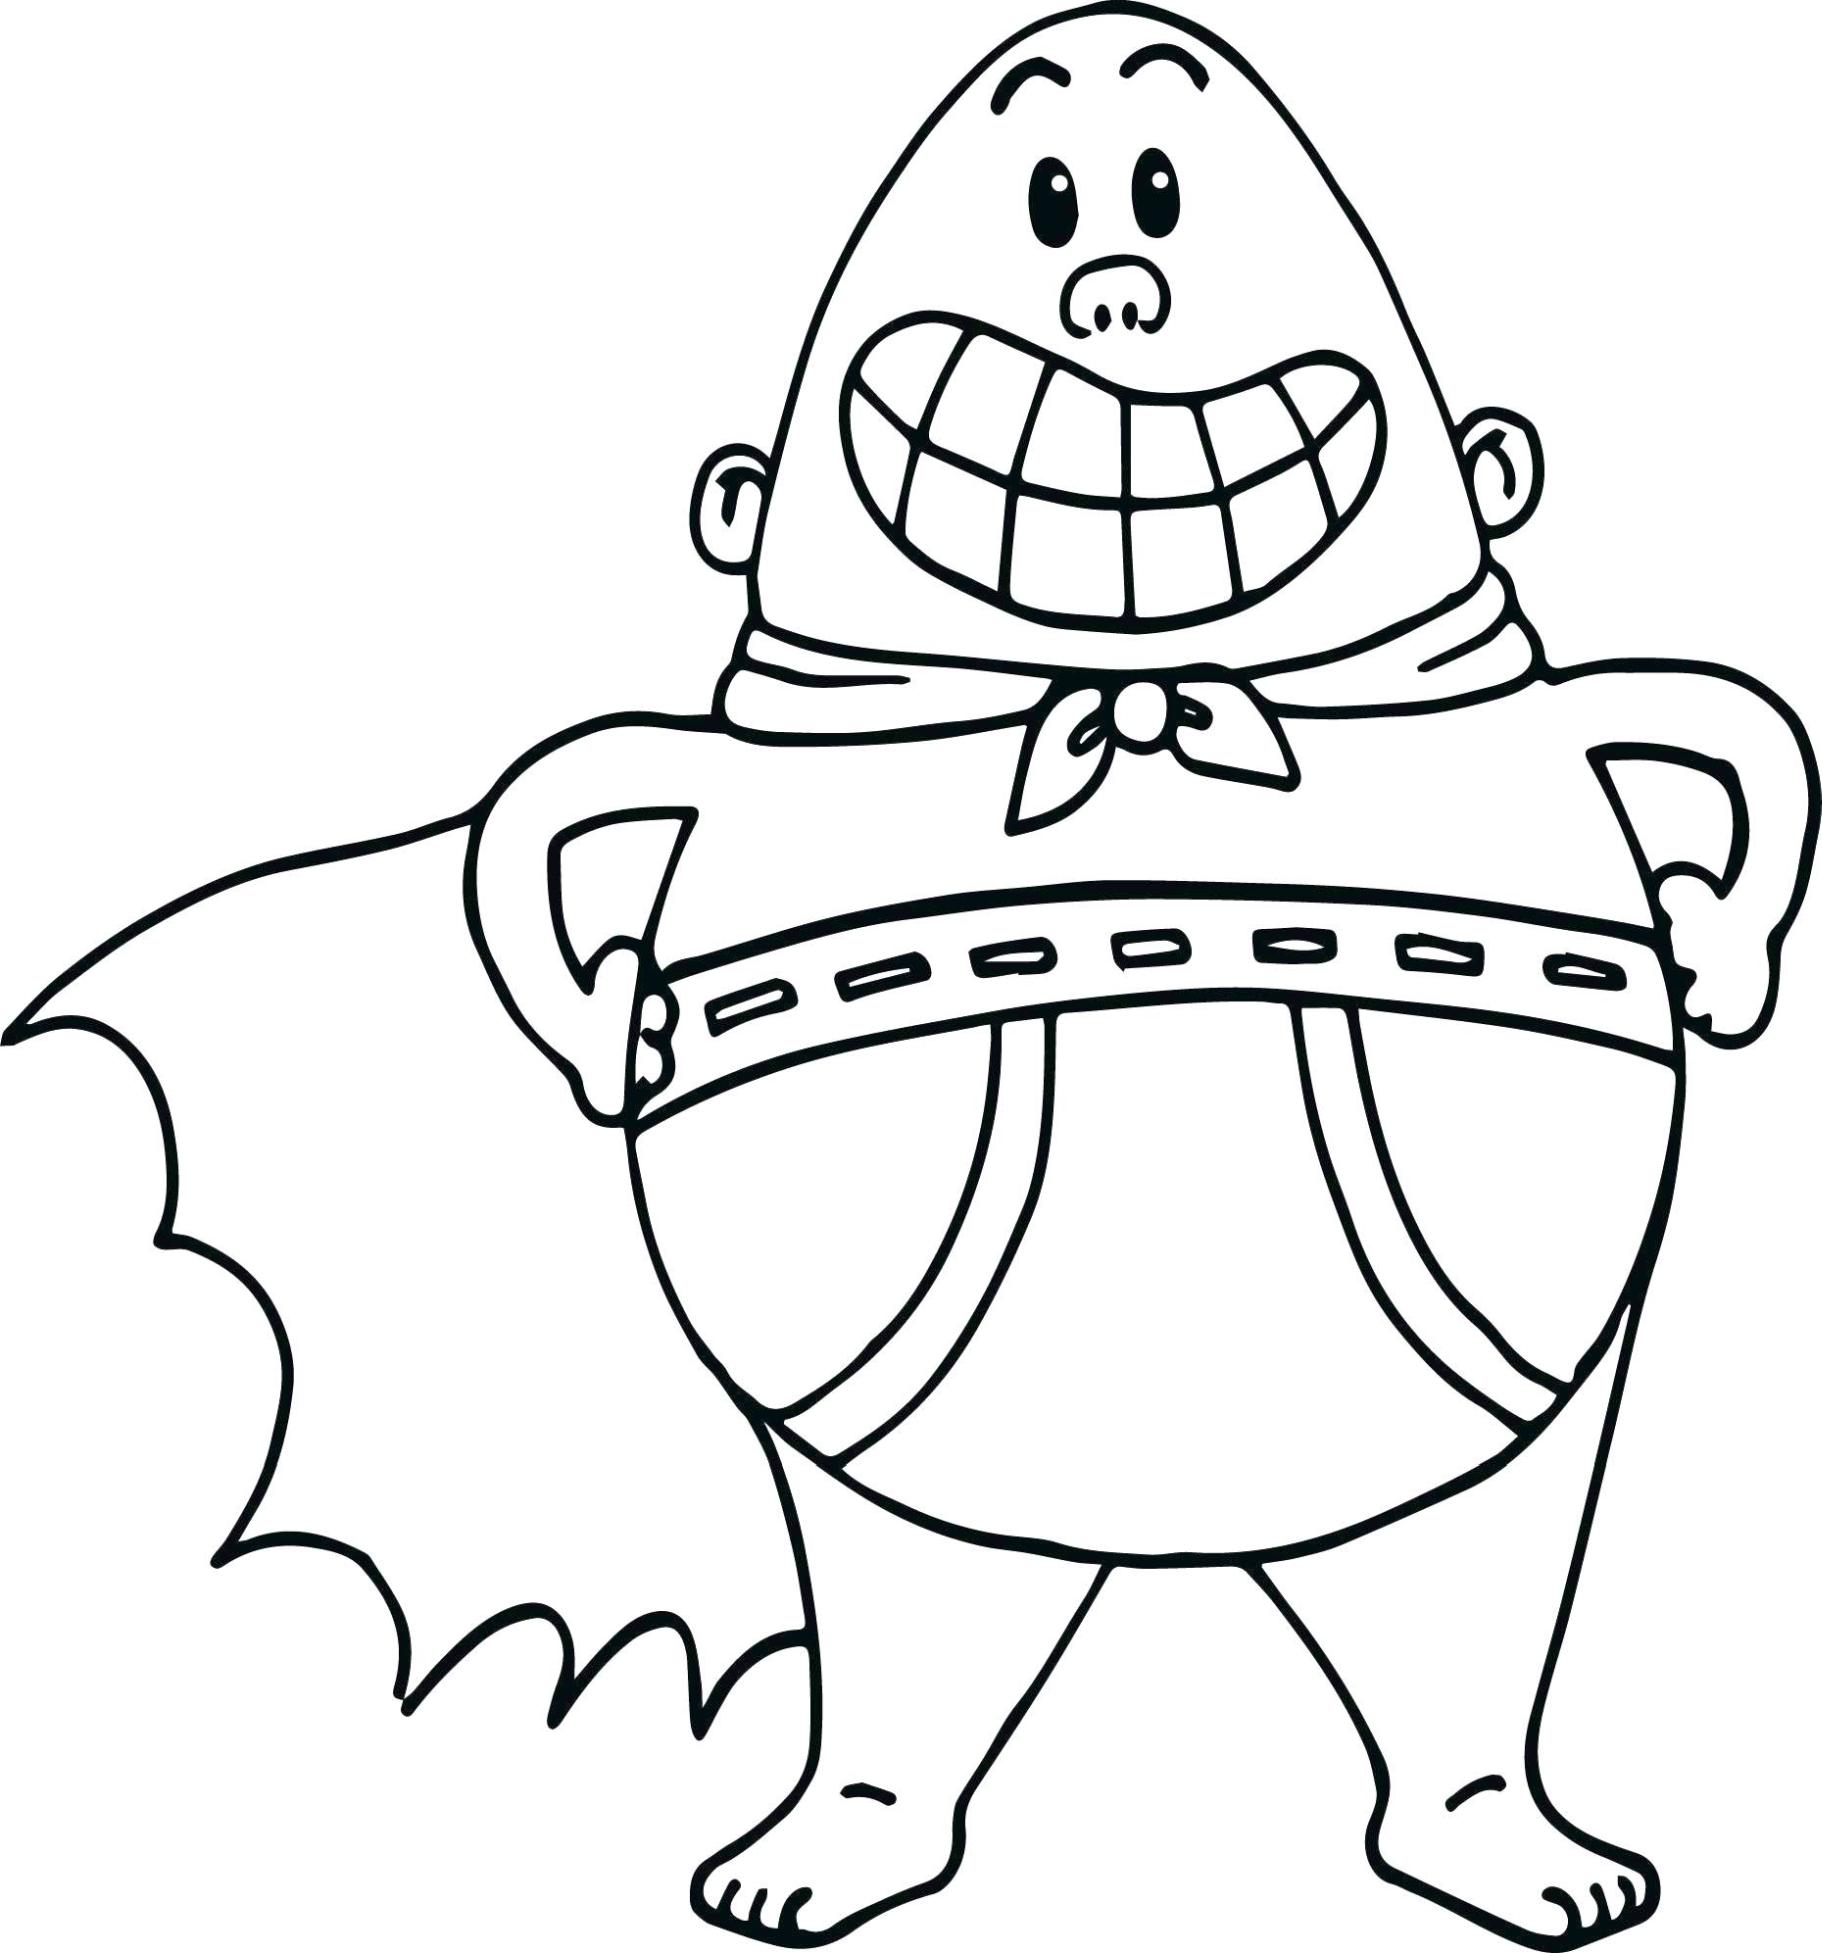 20+ Free Printable Captain Underpants Coloring Pages - Everfreecoloring.com